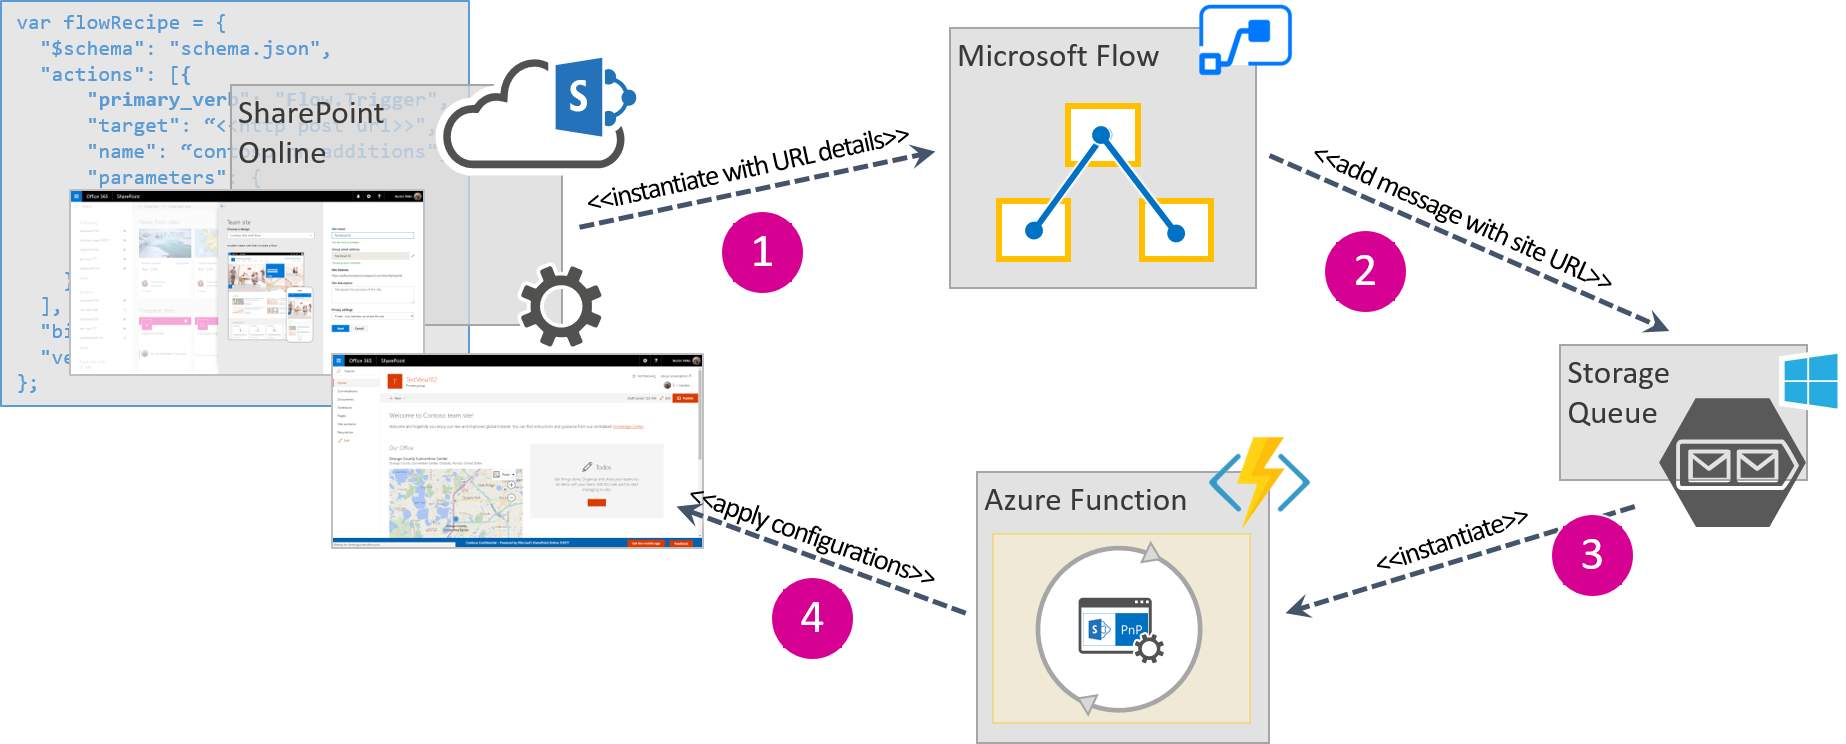 Process of triggering a Microsoft Flow